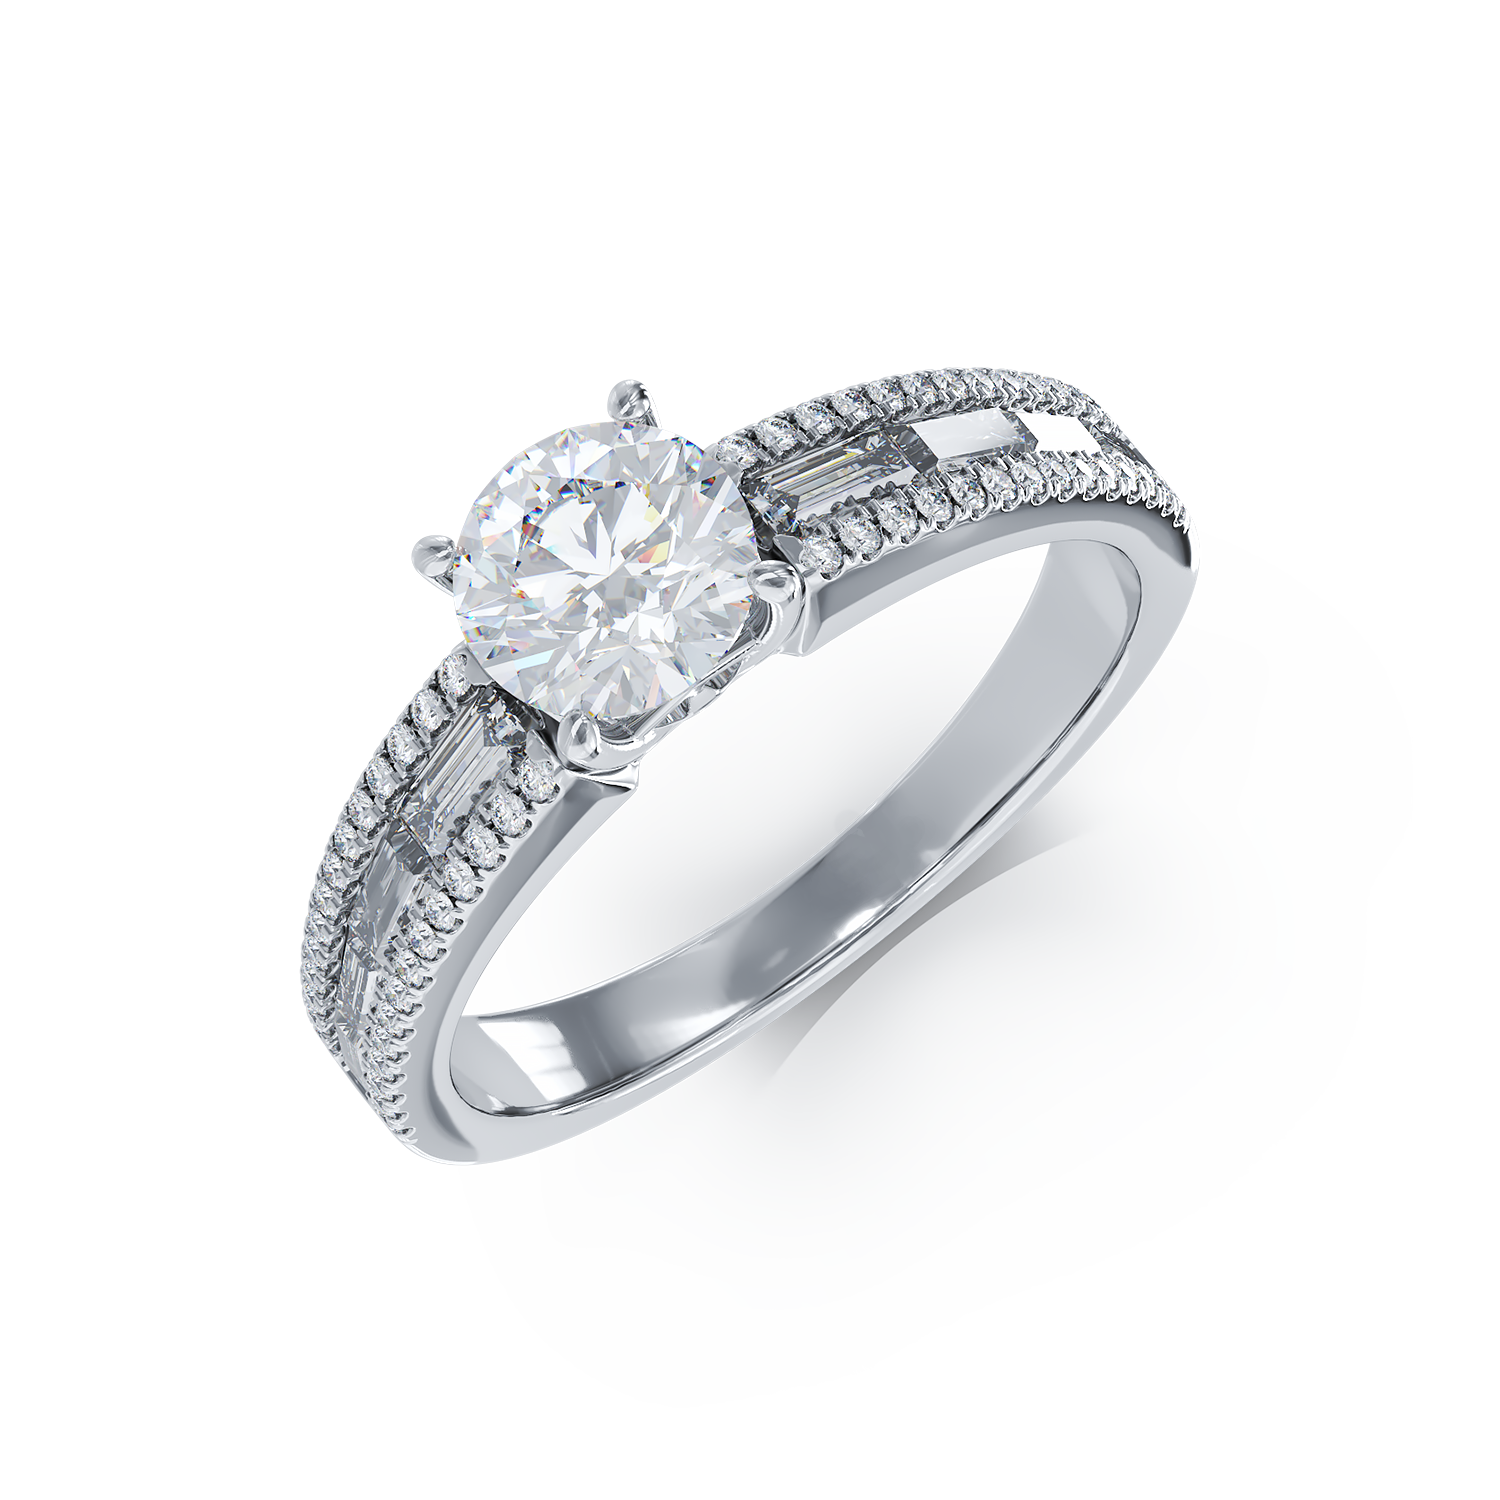 White gold engagement ring with 1.38ct diamonds